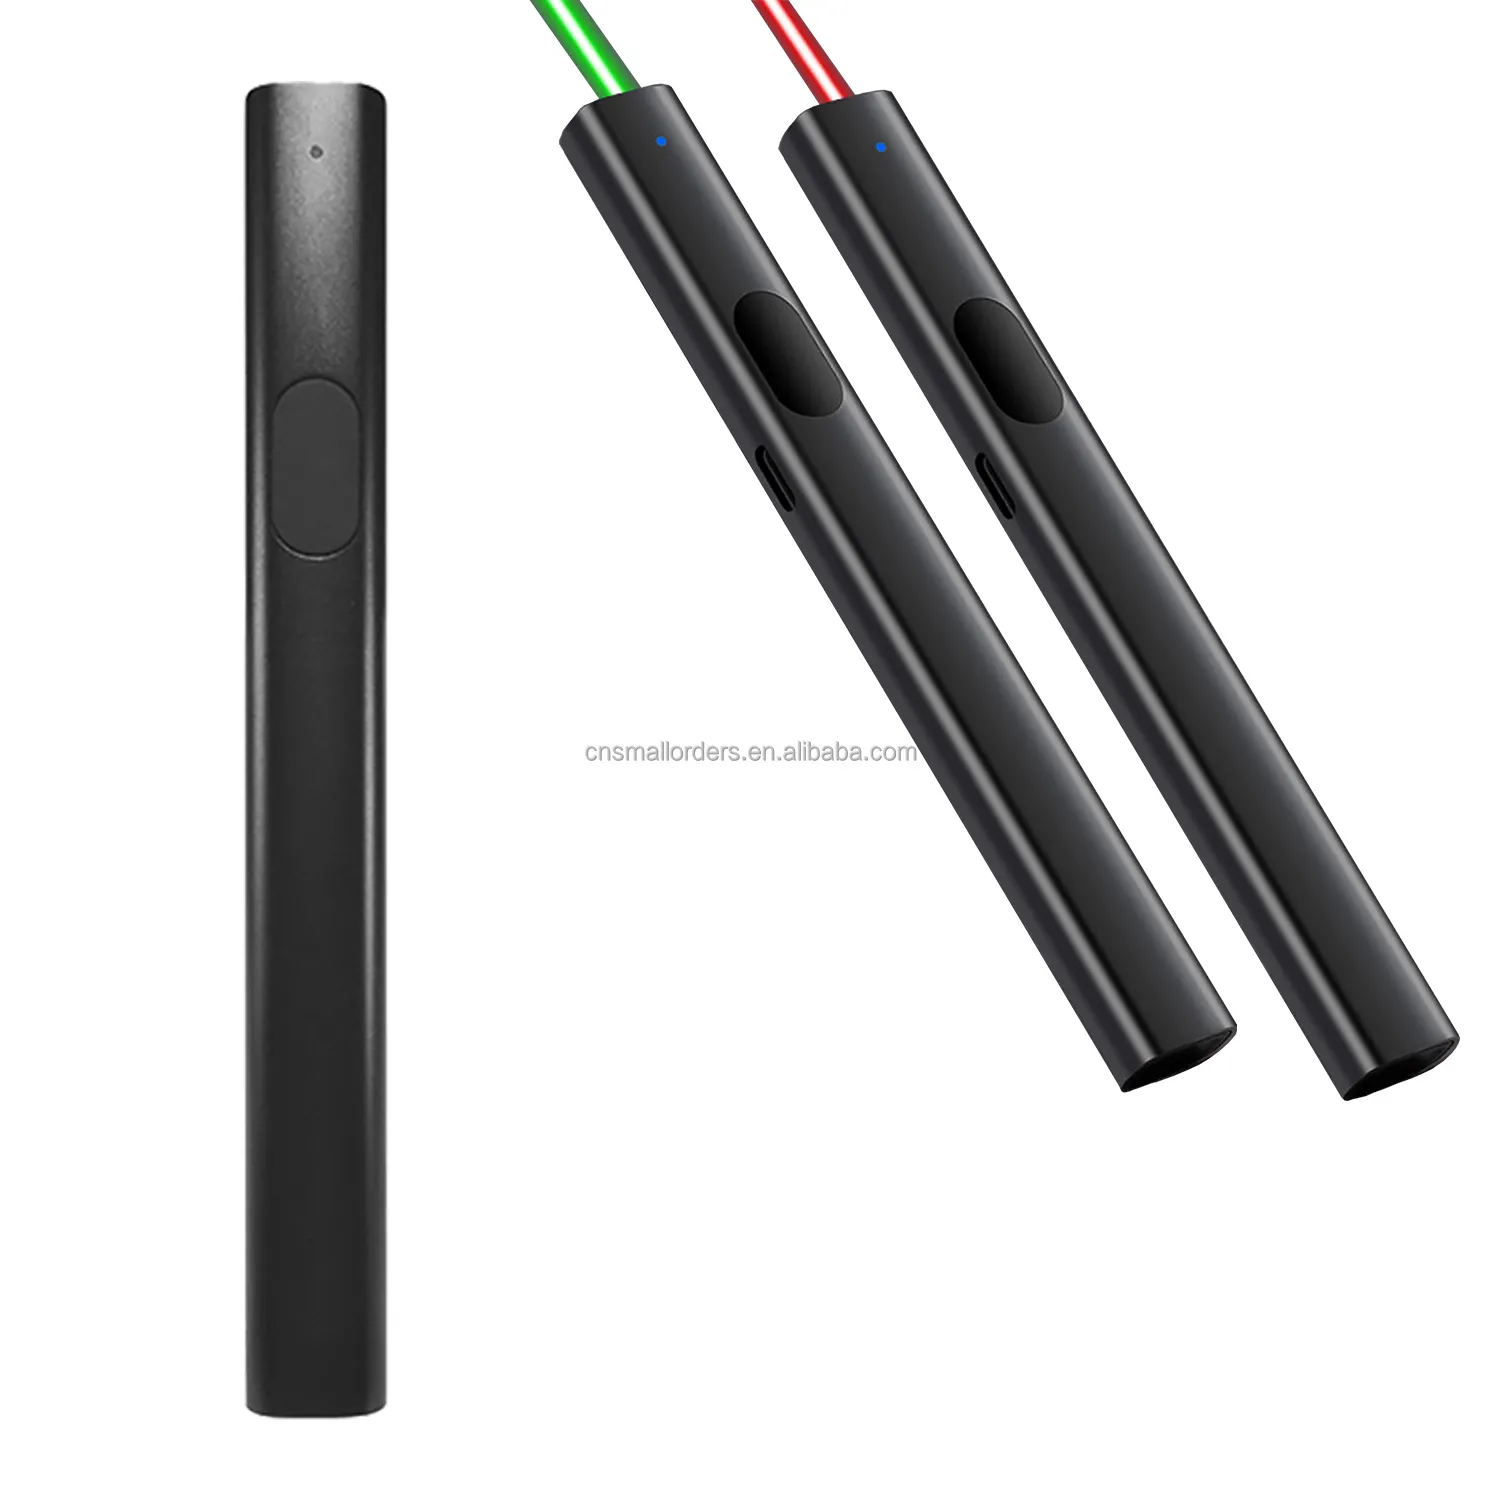 SmallOrders Promotional Products Business Gift Gifts Items Giveaway Custom LOGO red and green Laser pointer 2023 new product